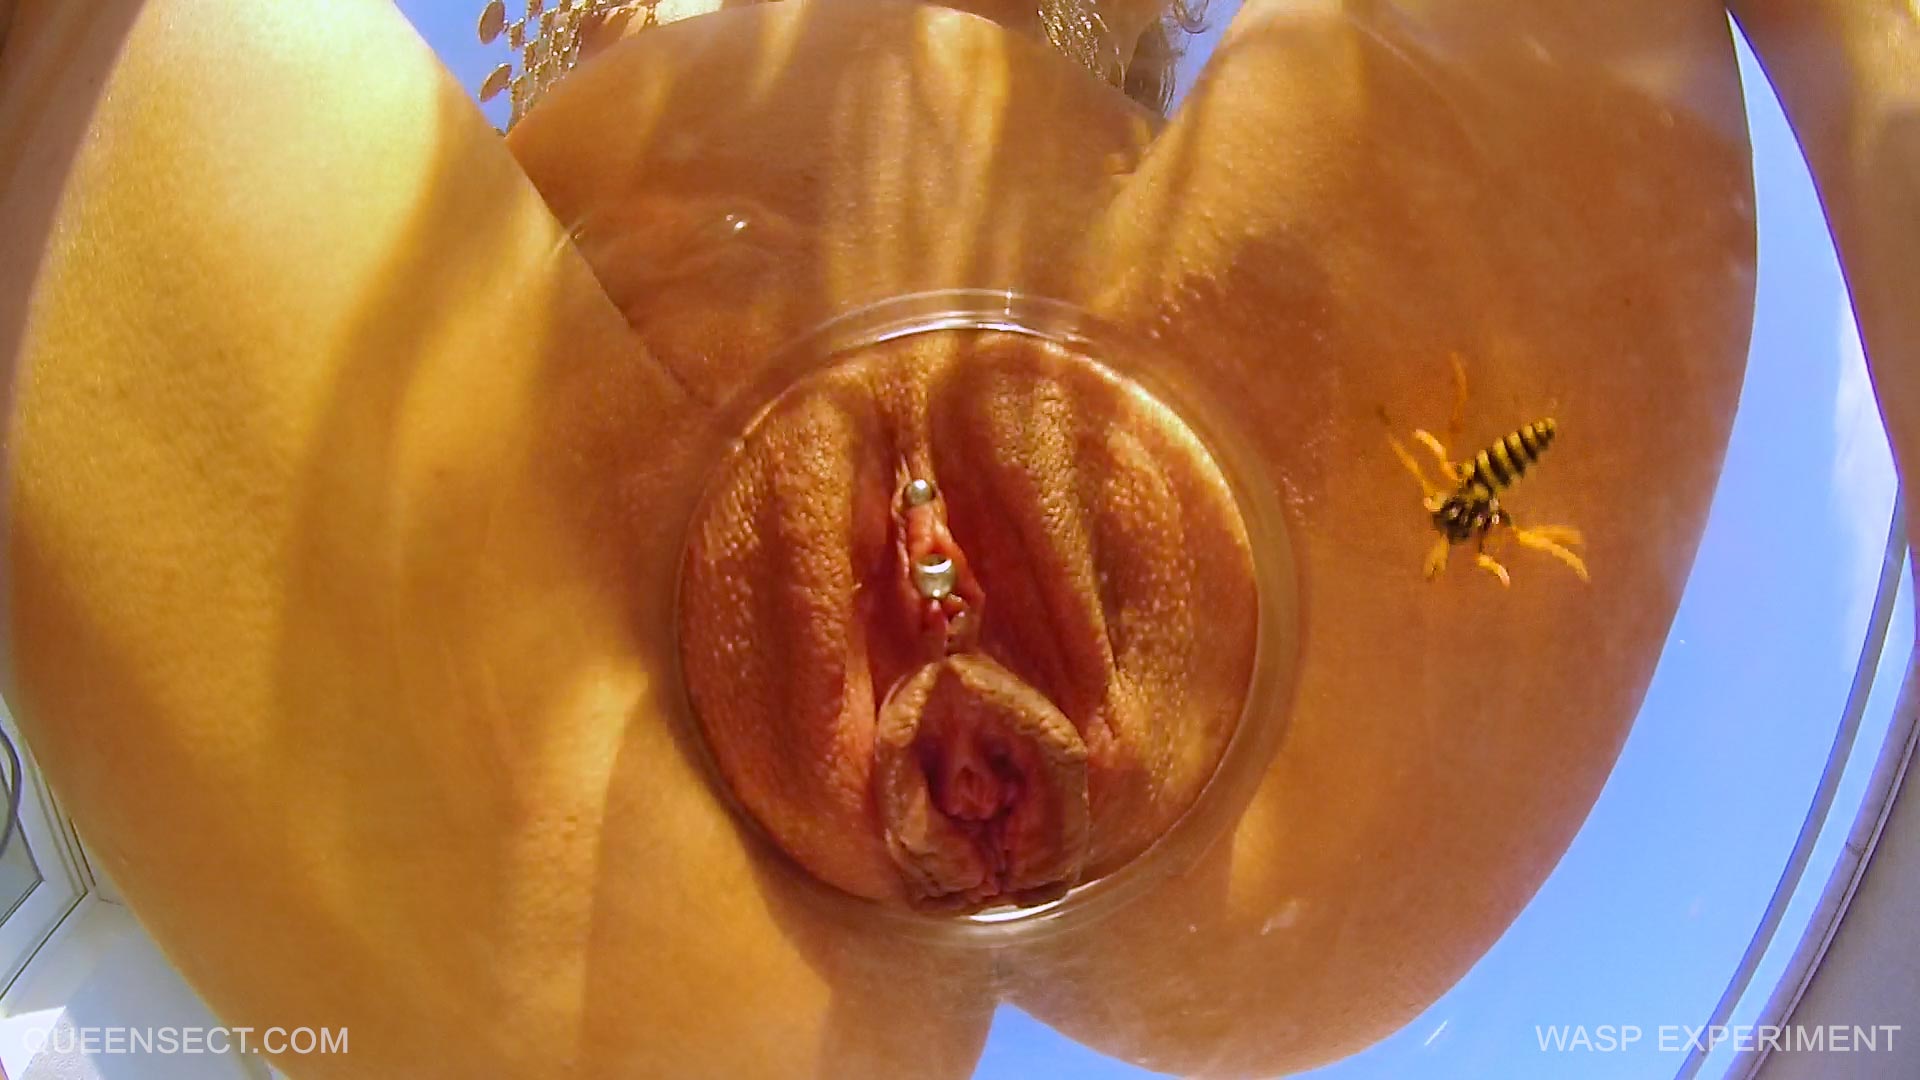 Bee sting clit - 🧡 Wasps, bees, flies and more off the net. 